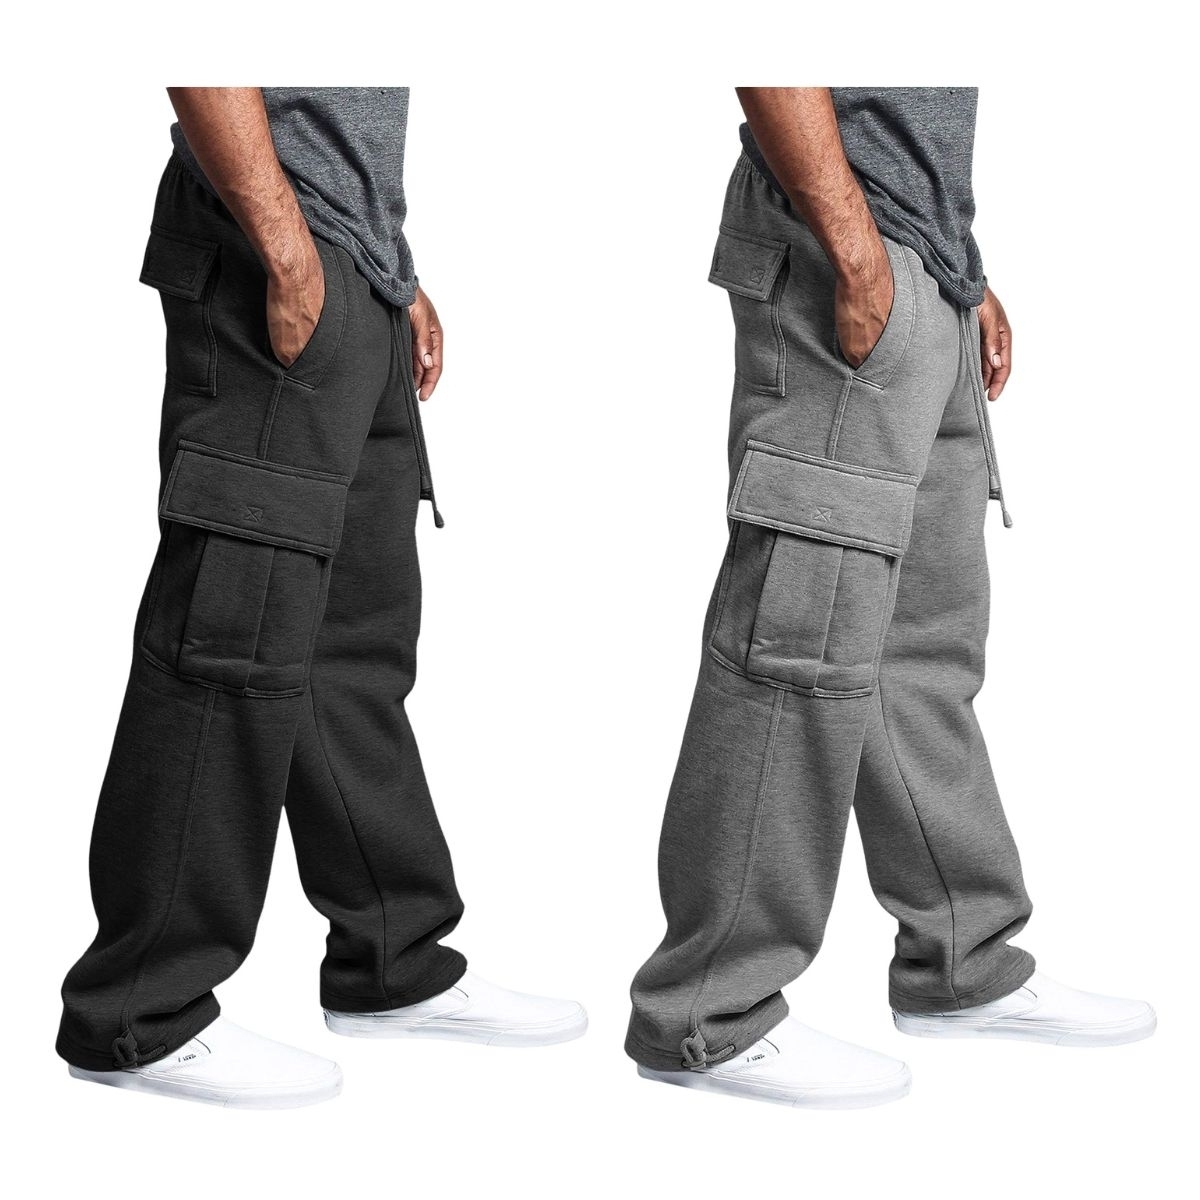 2-Pack: Men's Casual Solid Fleece Lined Cargo Jogger Soft Sweatpants With Pockets - Black&navy, X-large